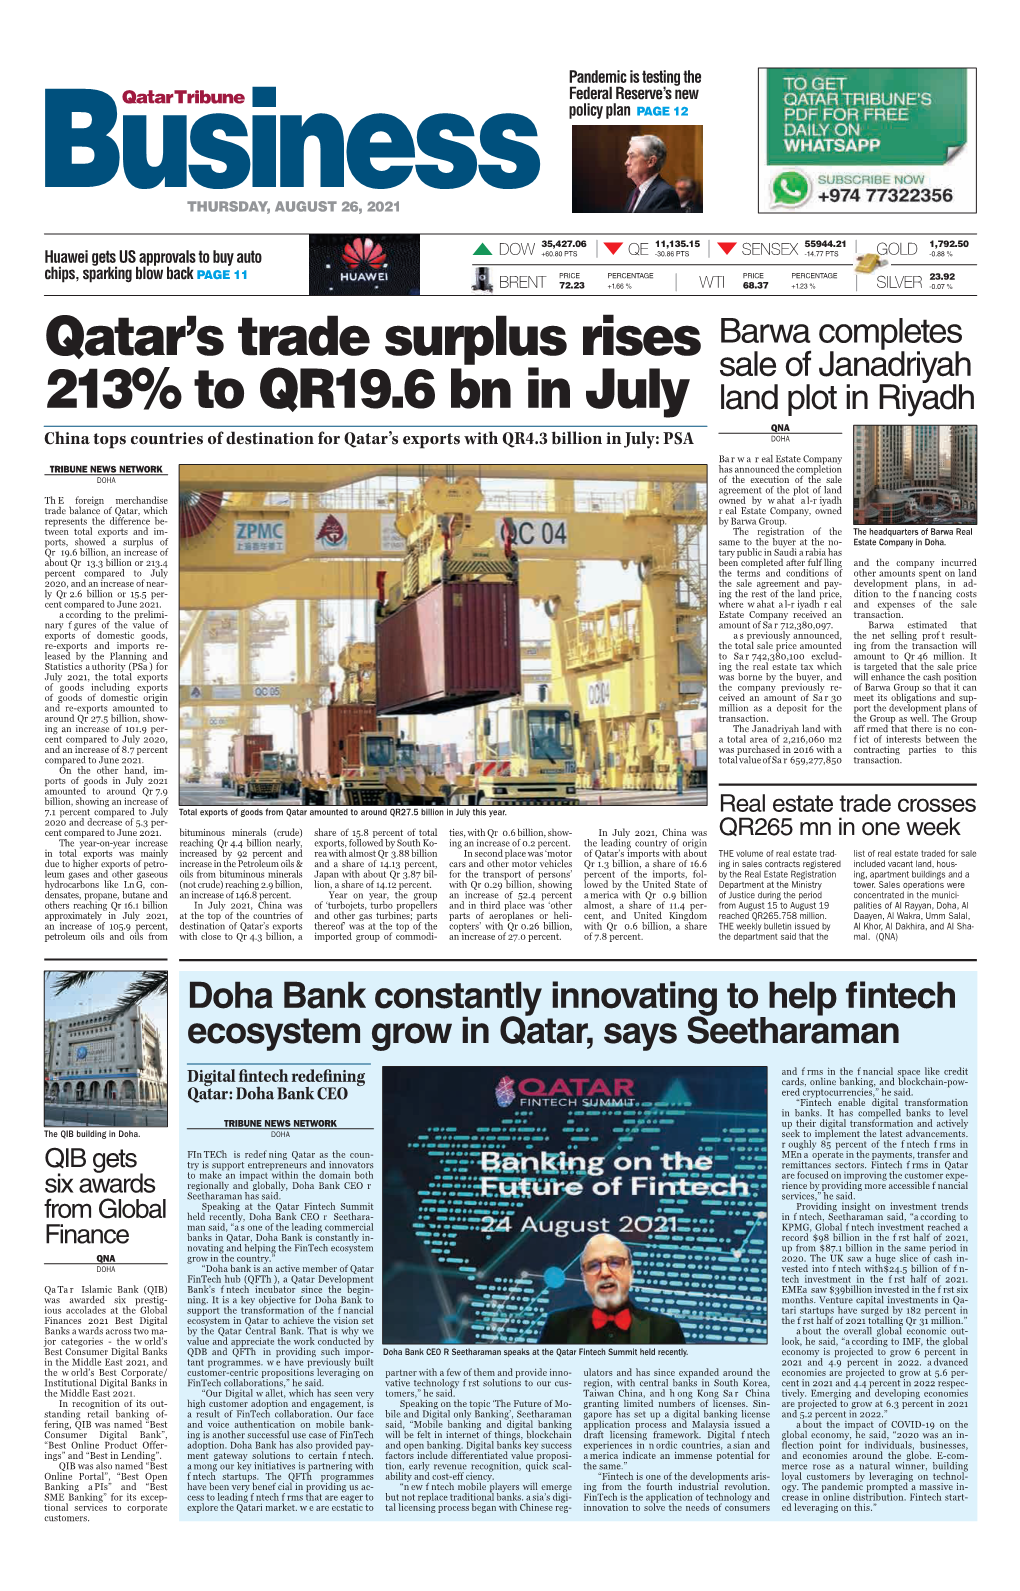 Doha Bank Constantly Innovating to Help Fintech Ecosystem Grow in Qatar, Says Seetharaman